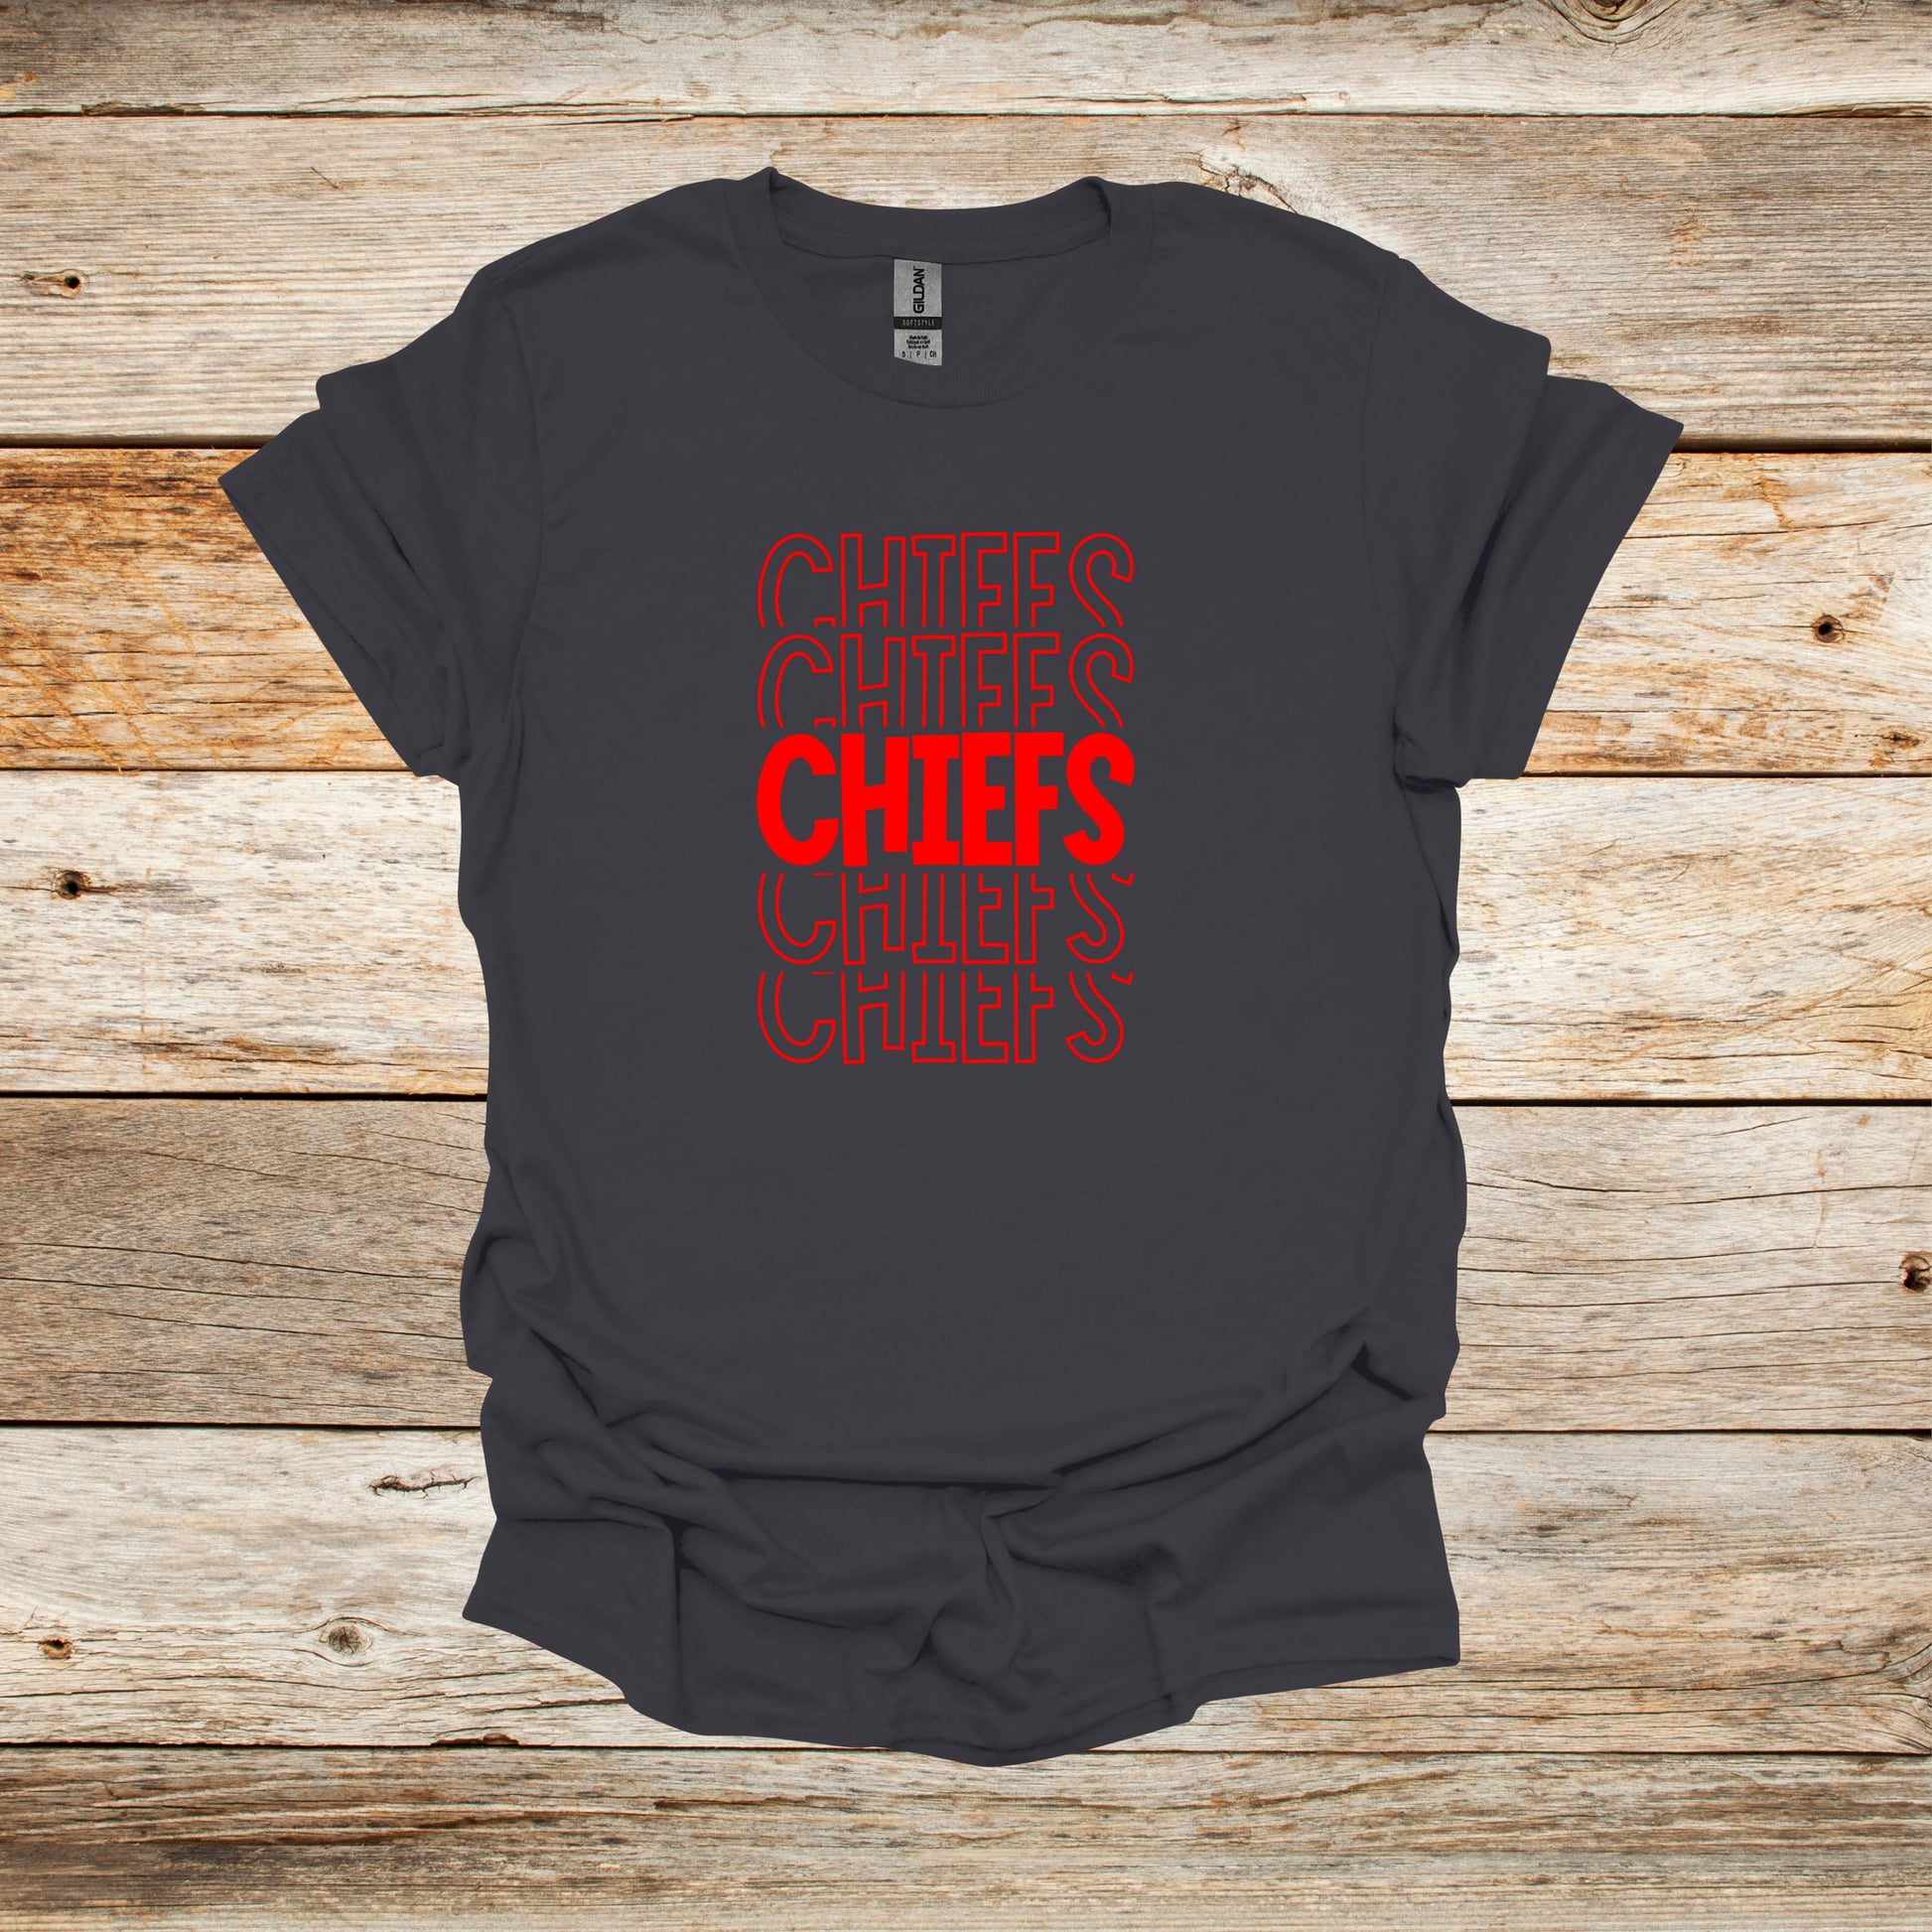 Football T-Shirt - Kansas City Chiefs - Chiefs - Adult and Children's Tee Shirts - Chiefs - Sports T-Shirts Graphic Avenue Charcoal Adult Small 